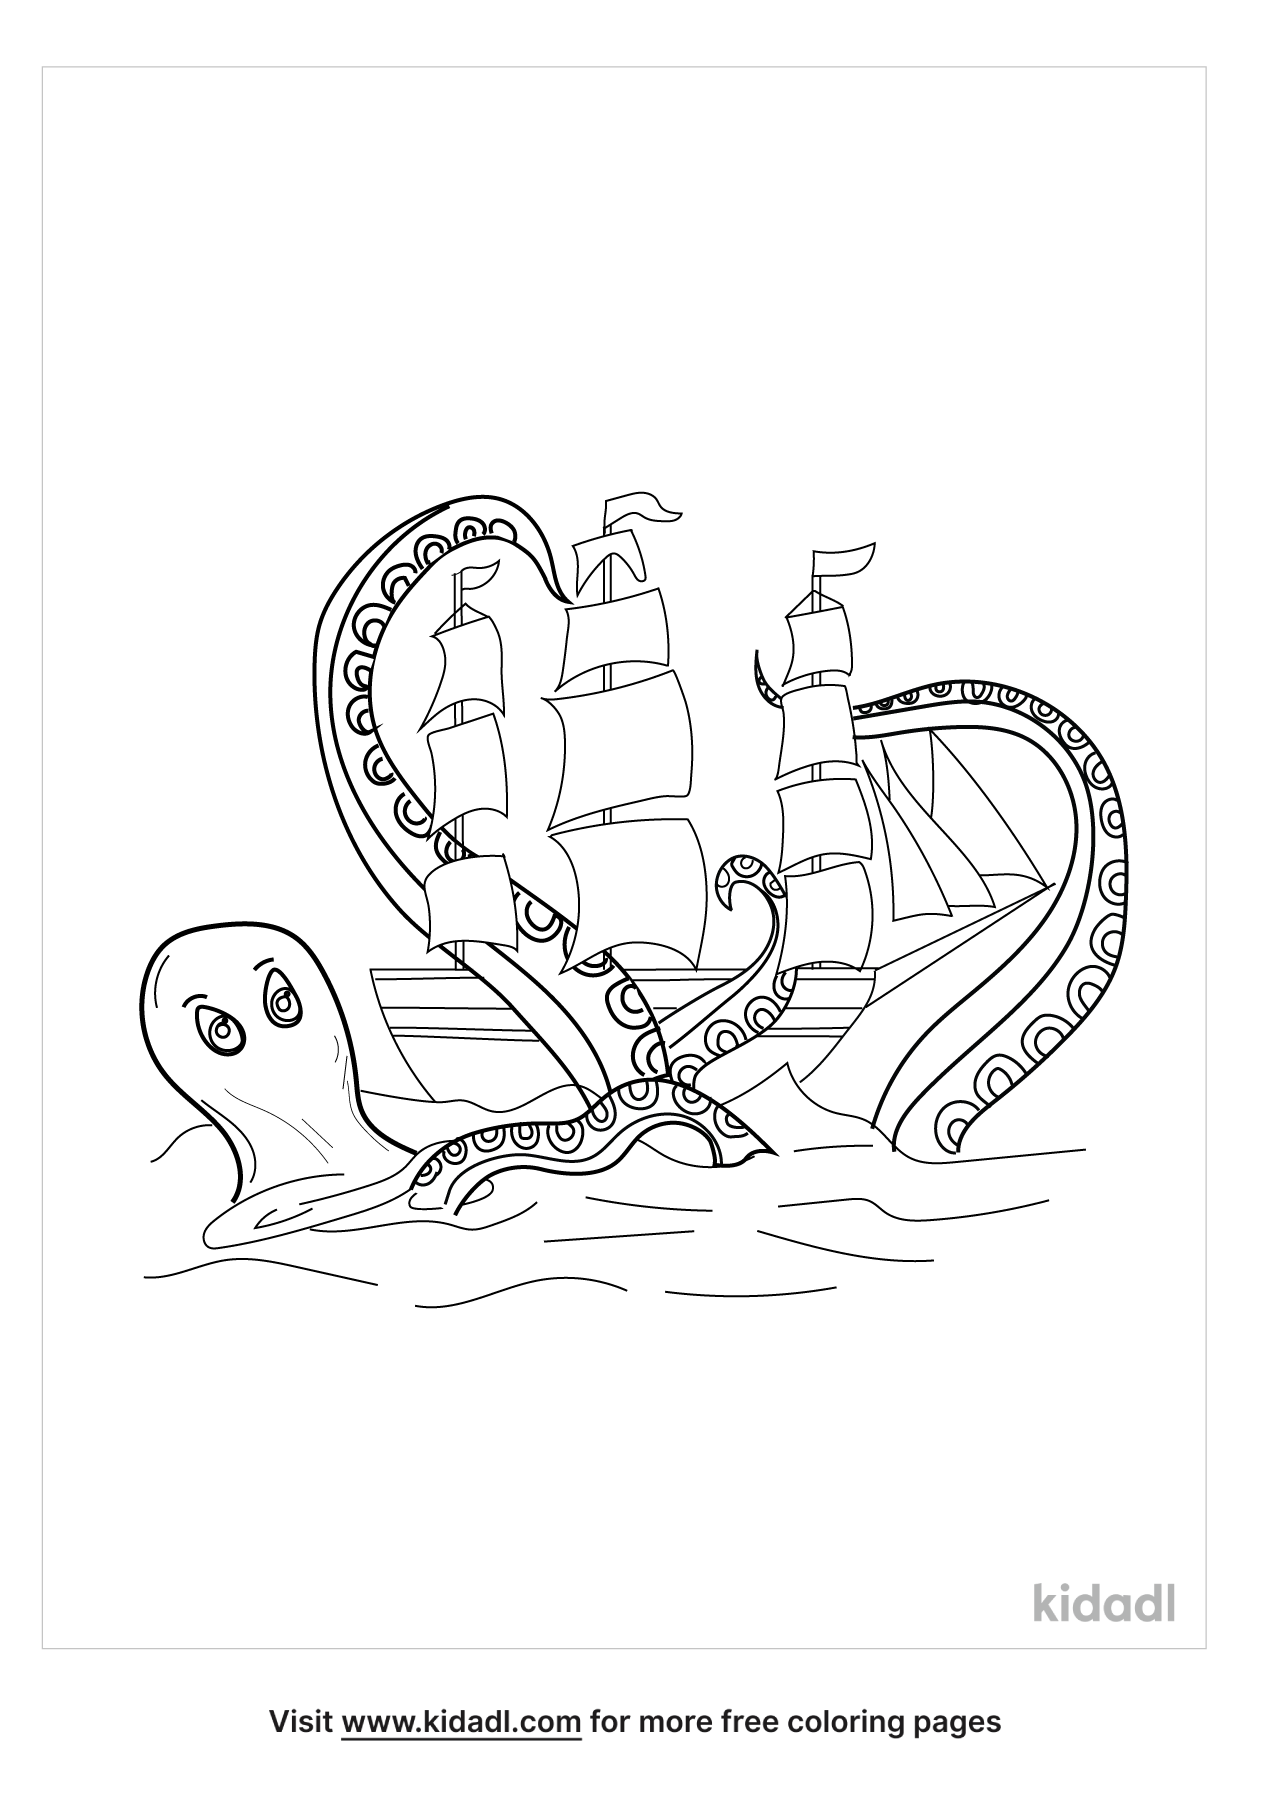 Kraken Coloring Pages | Free Fairytales & Stories Coloring Pages | Kidadl